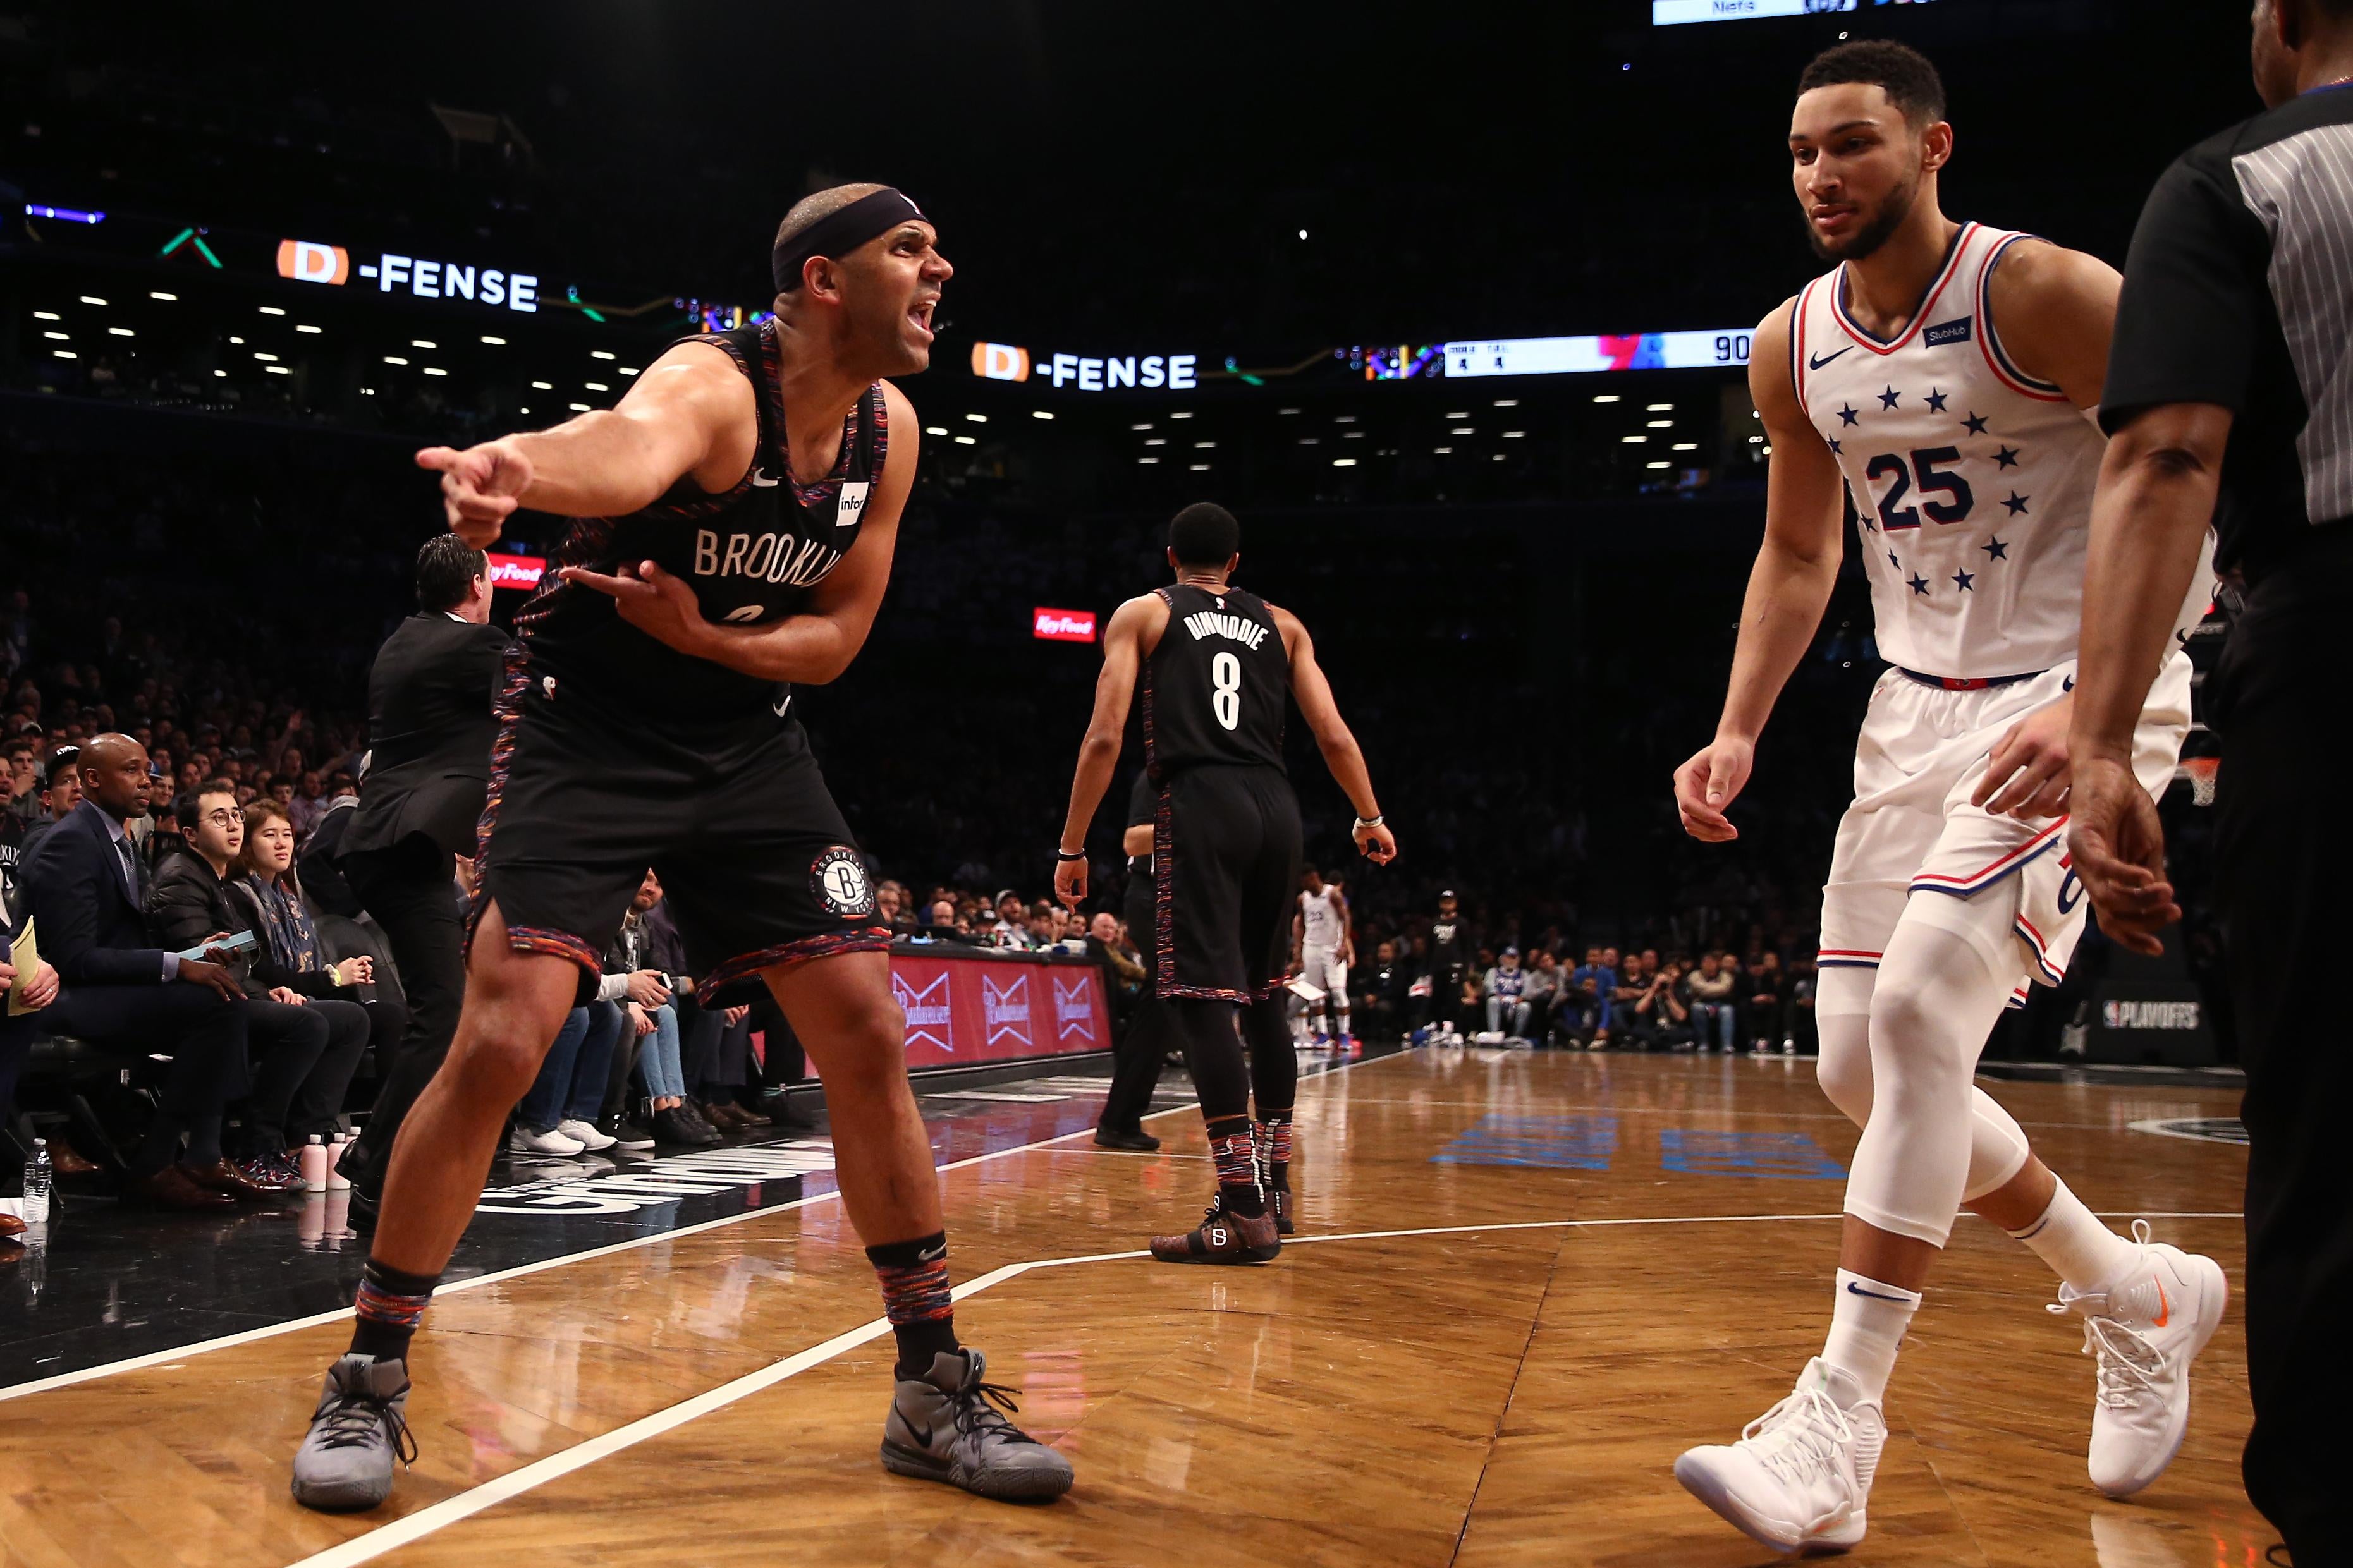 Ben Simmons vs. Jared Dudley: Who's winning this bizarre feud?